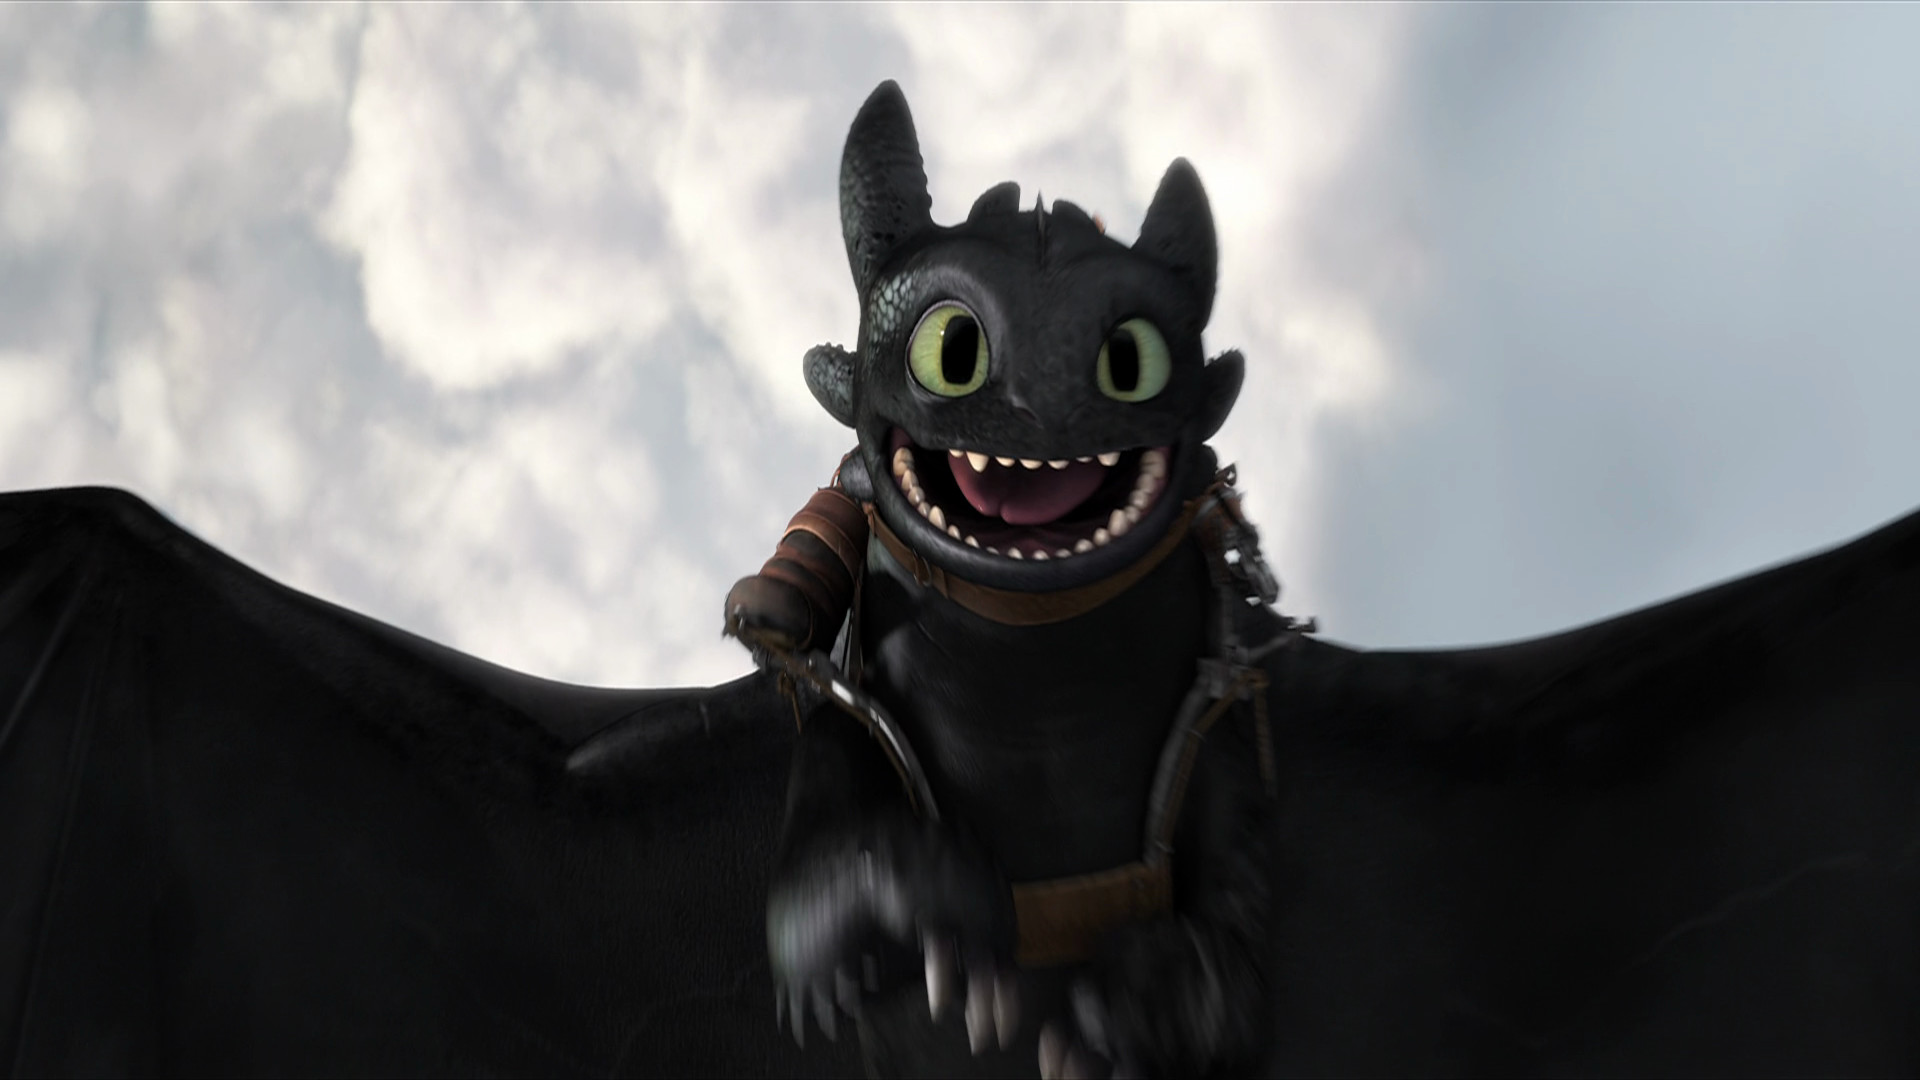 Toothless The Dragon Wallpaper ①